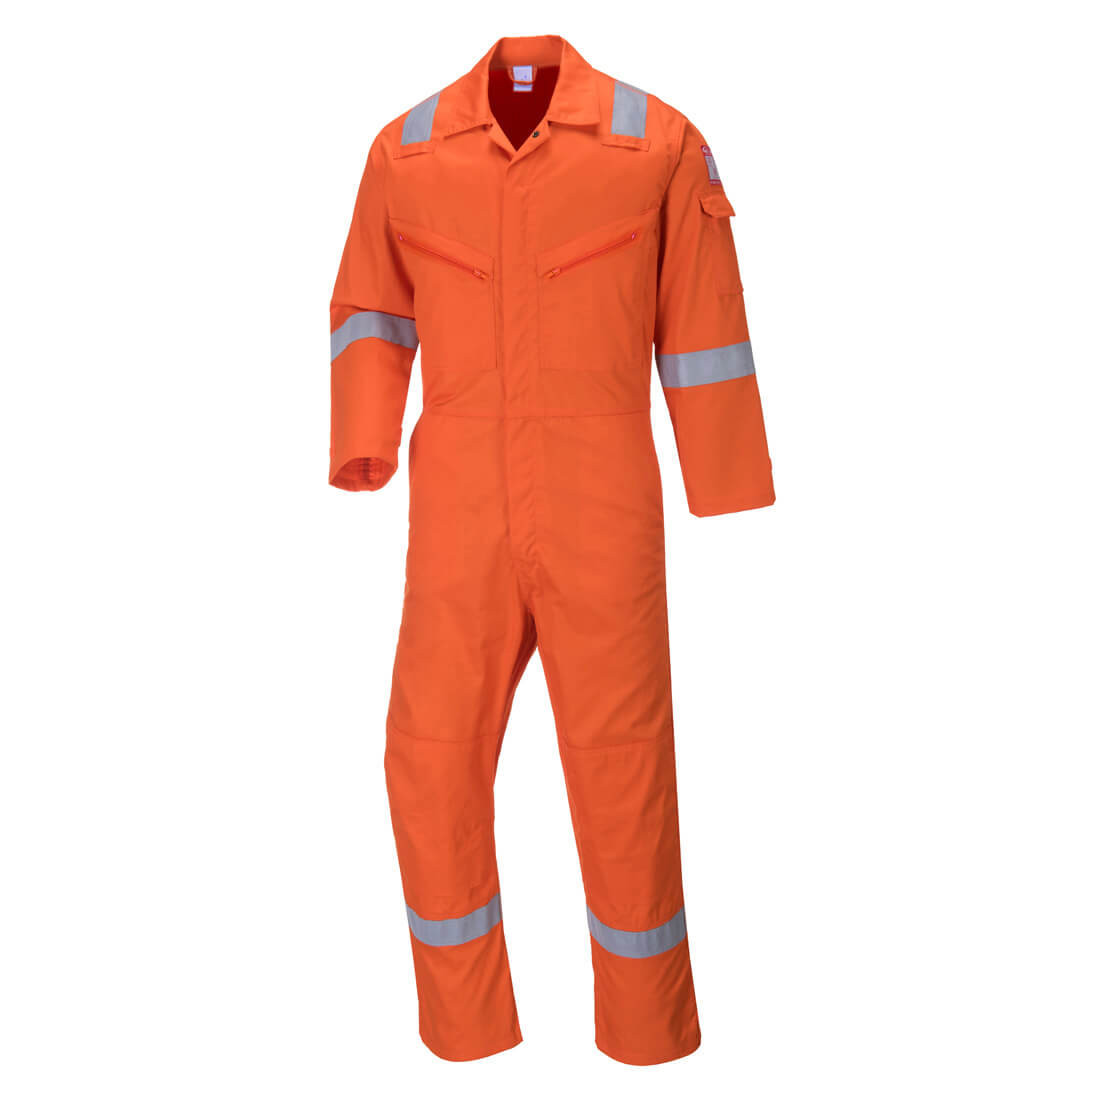 Iona Cotton Coverall - Safetywear